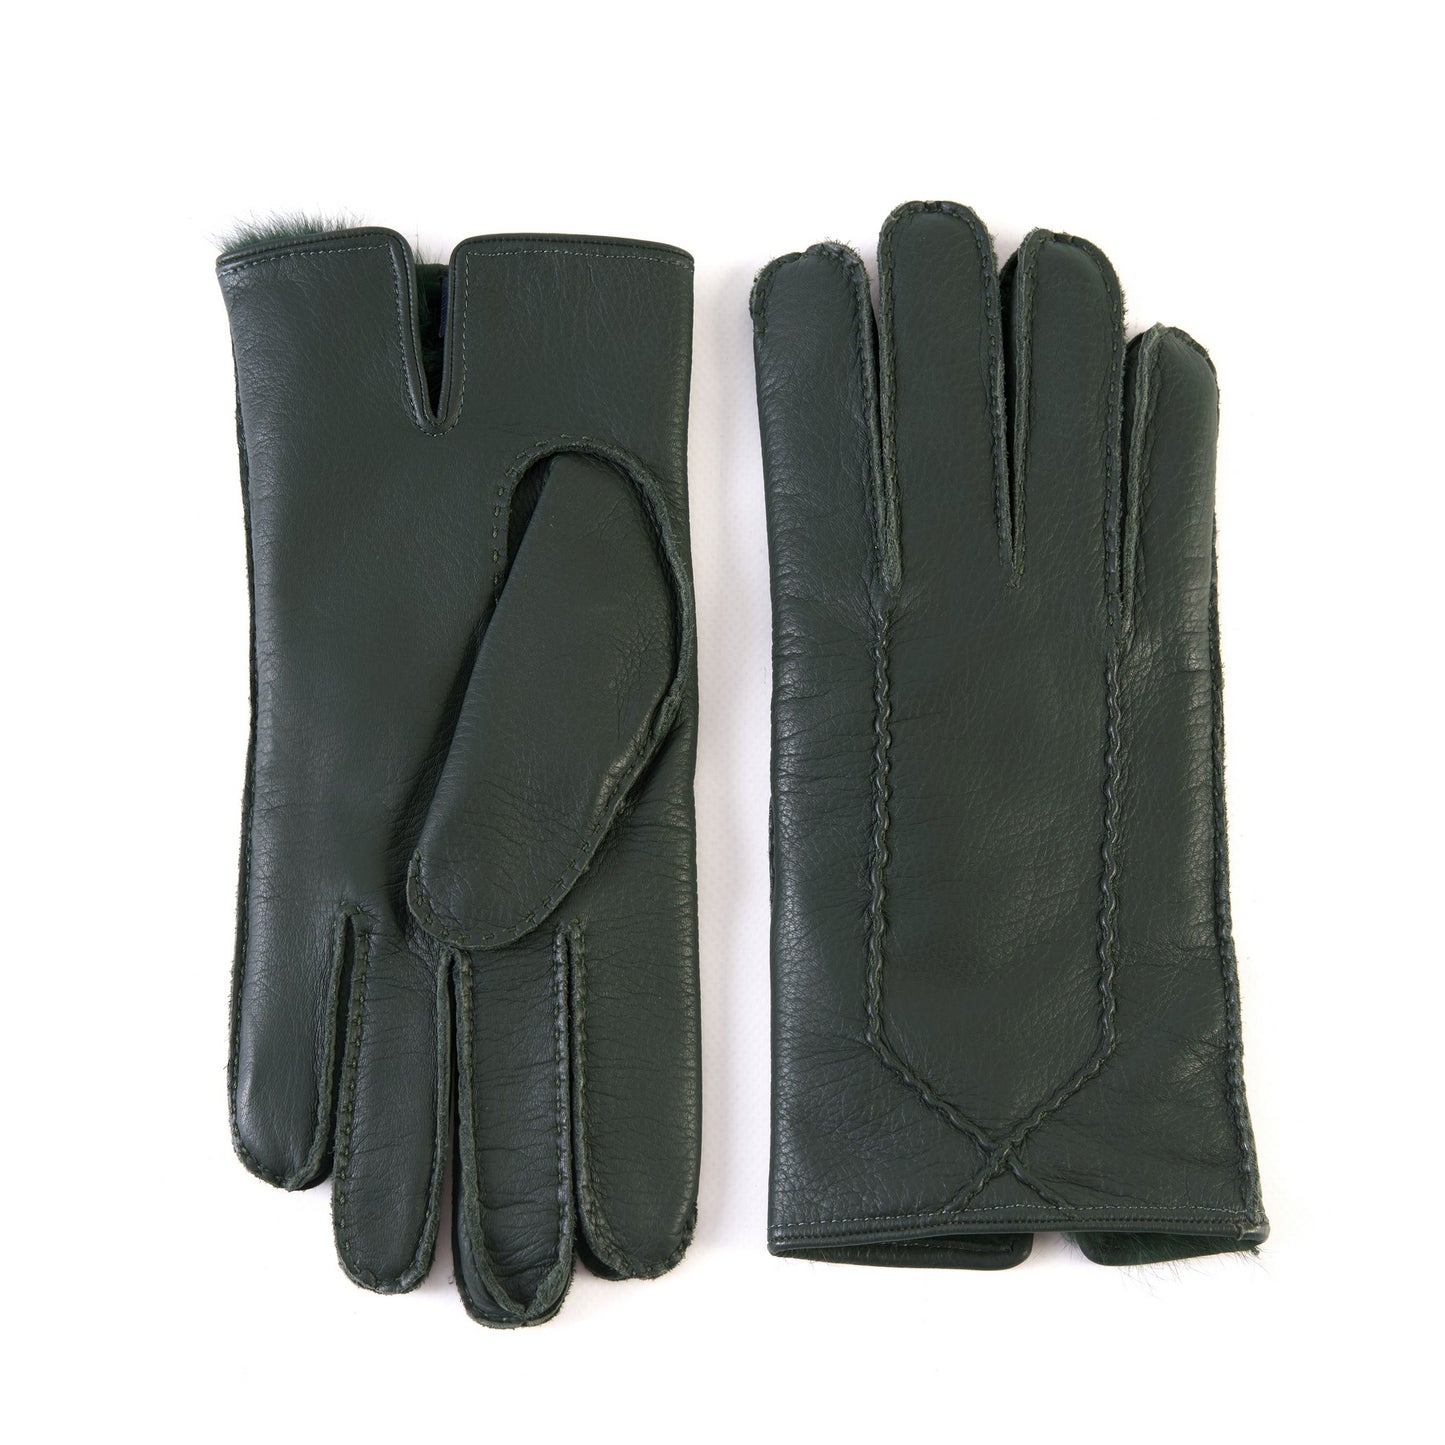 Men's fully hand-stitched taupe elk leather gloves with soft dyed natural fur lining